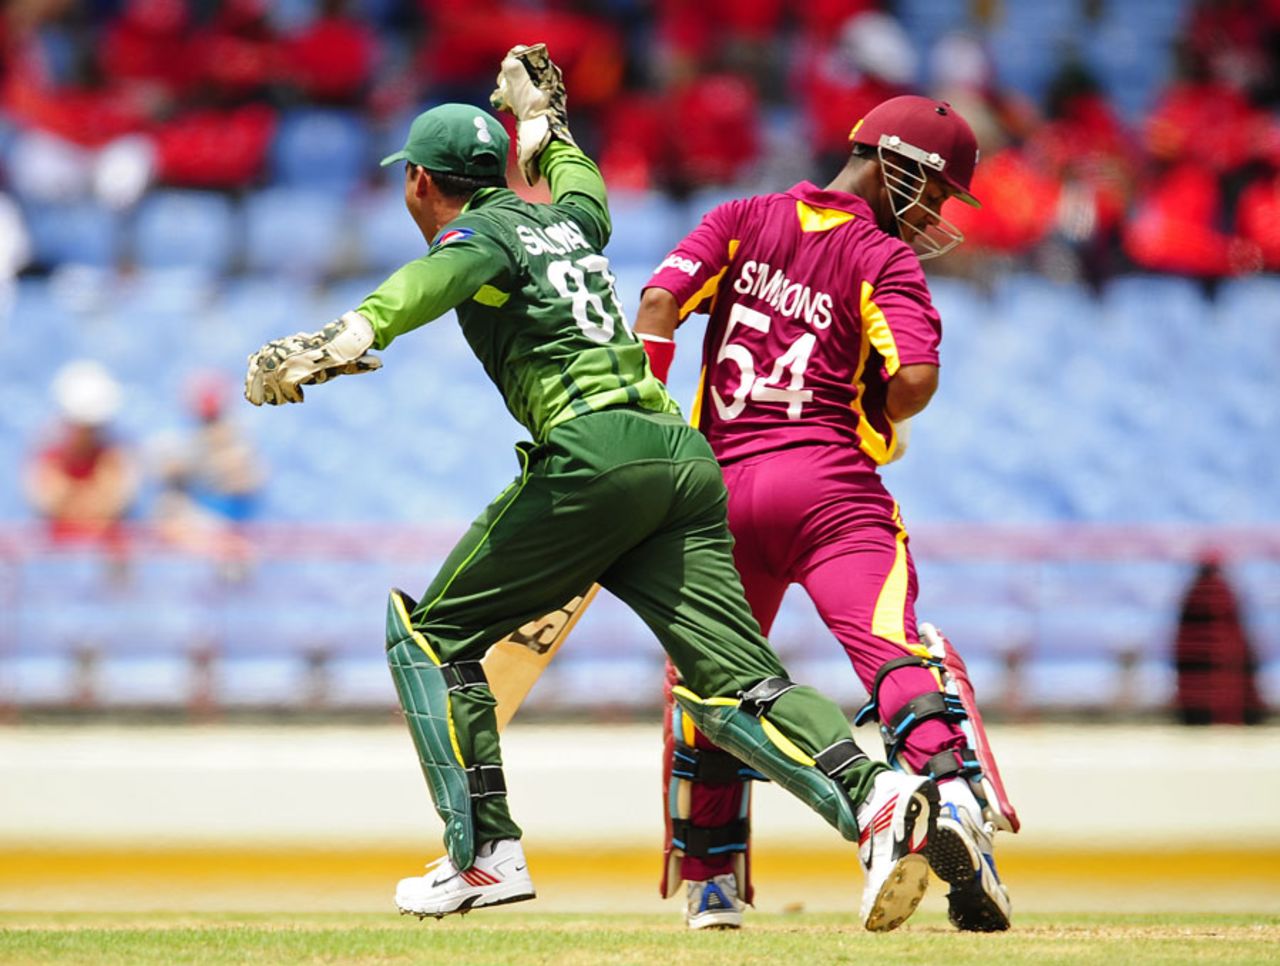 Lendl Simmons was caught behind for 24 off the bowling of Saeed Ajmal, West Indies v Pakistan, 1st ODI, St Lucia, April 23, 2011